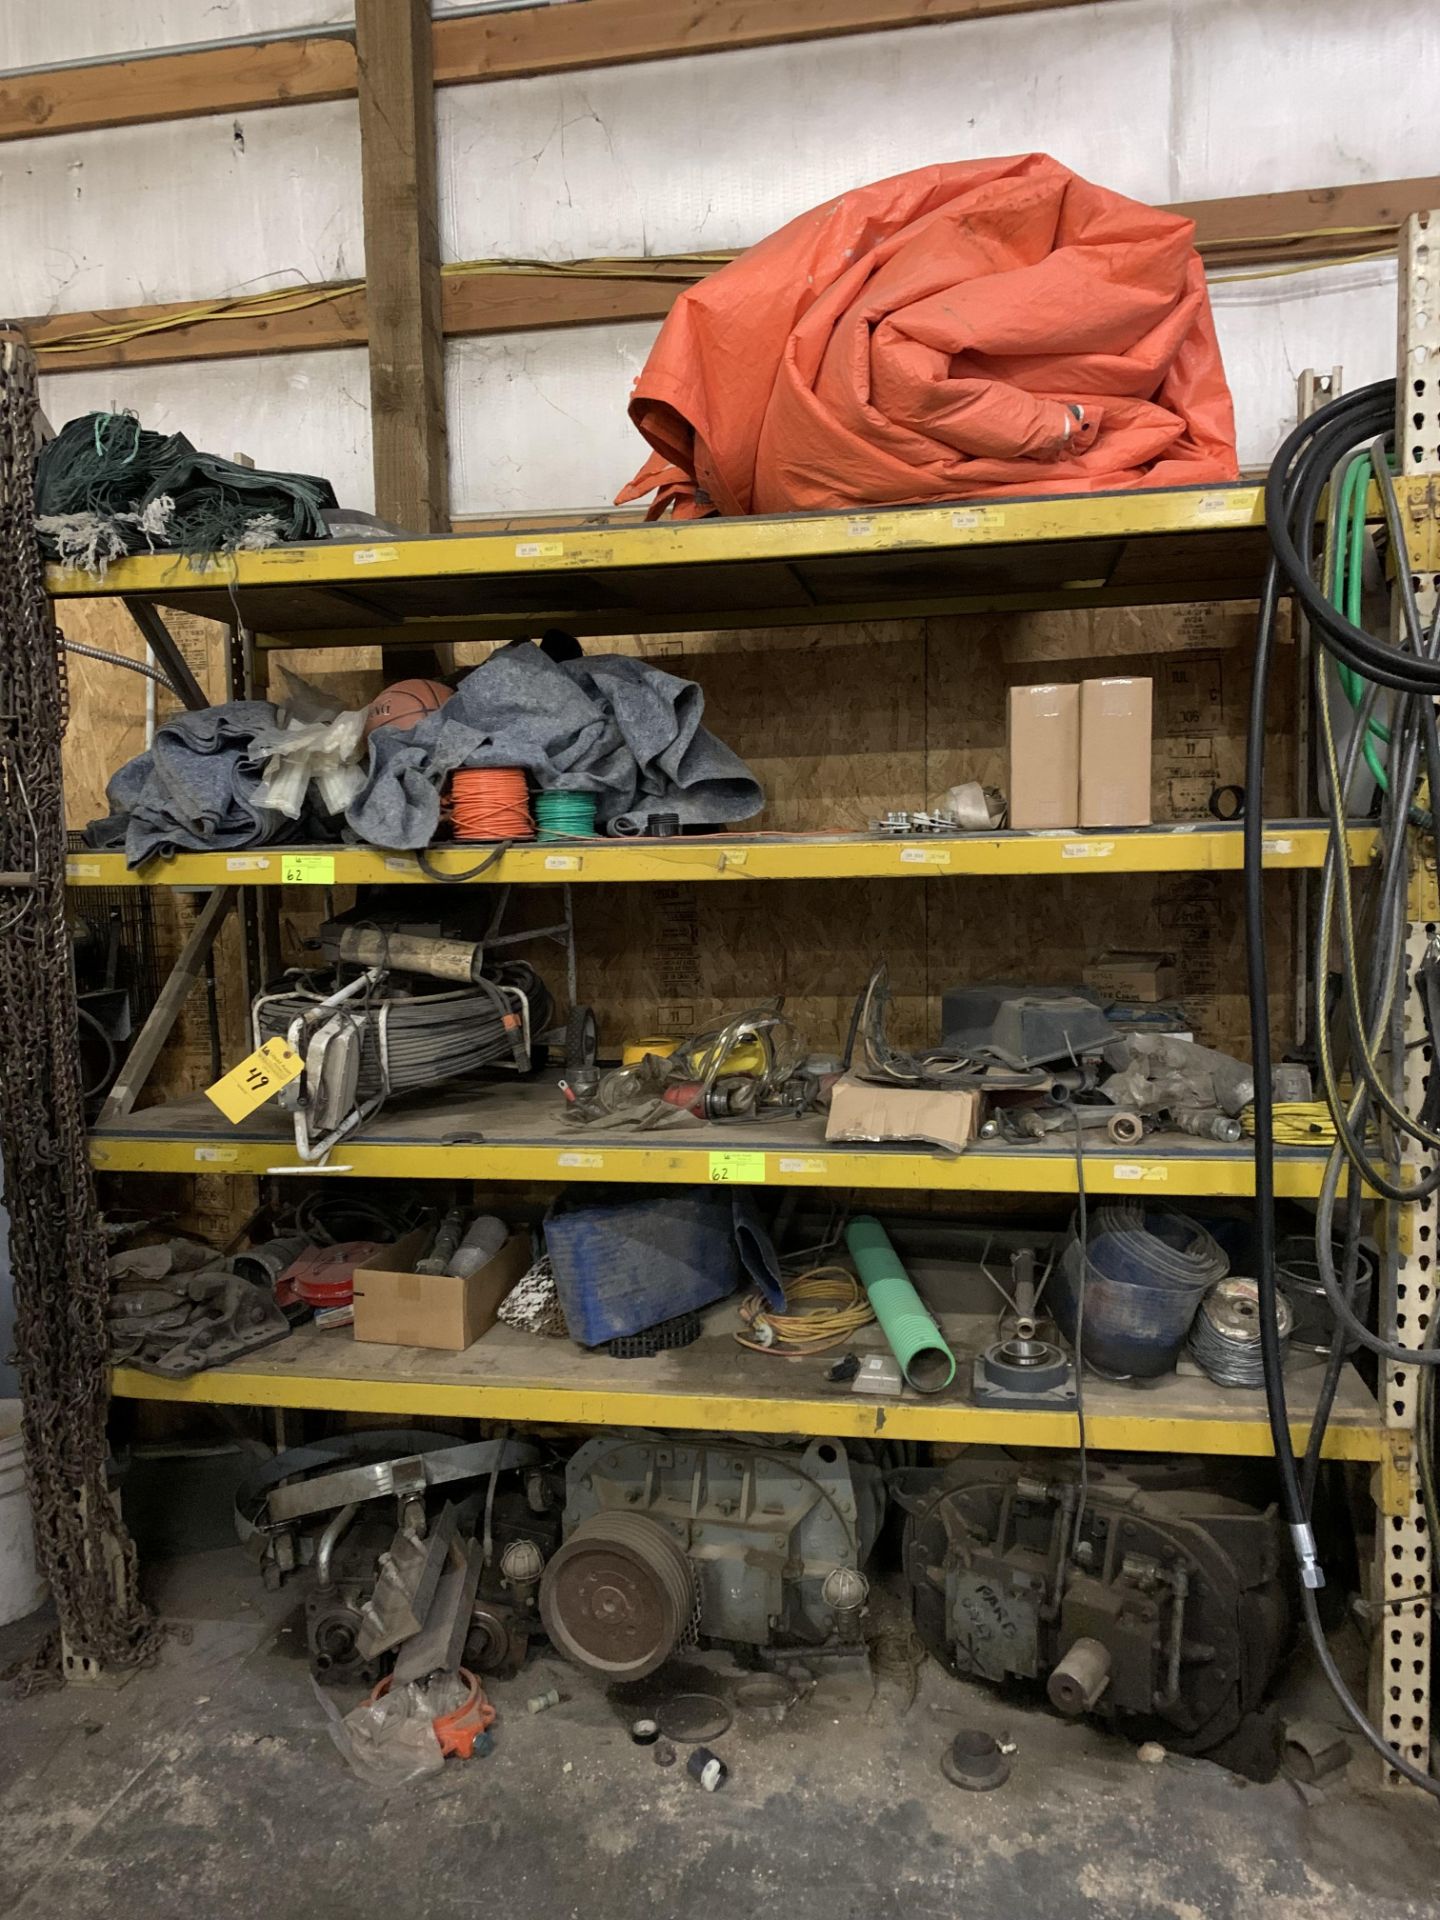 Contents of Racking - ***Excluding Lot # 49 - Tarp, cables, hoses, pumps, chain and misc equipment